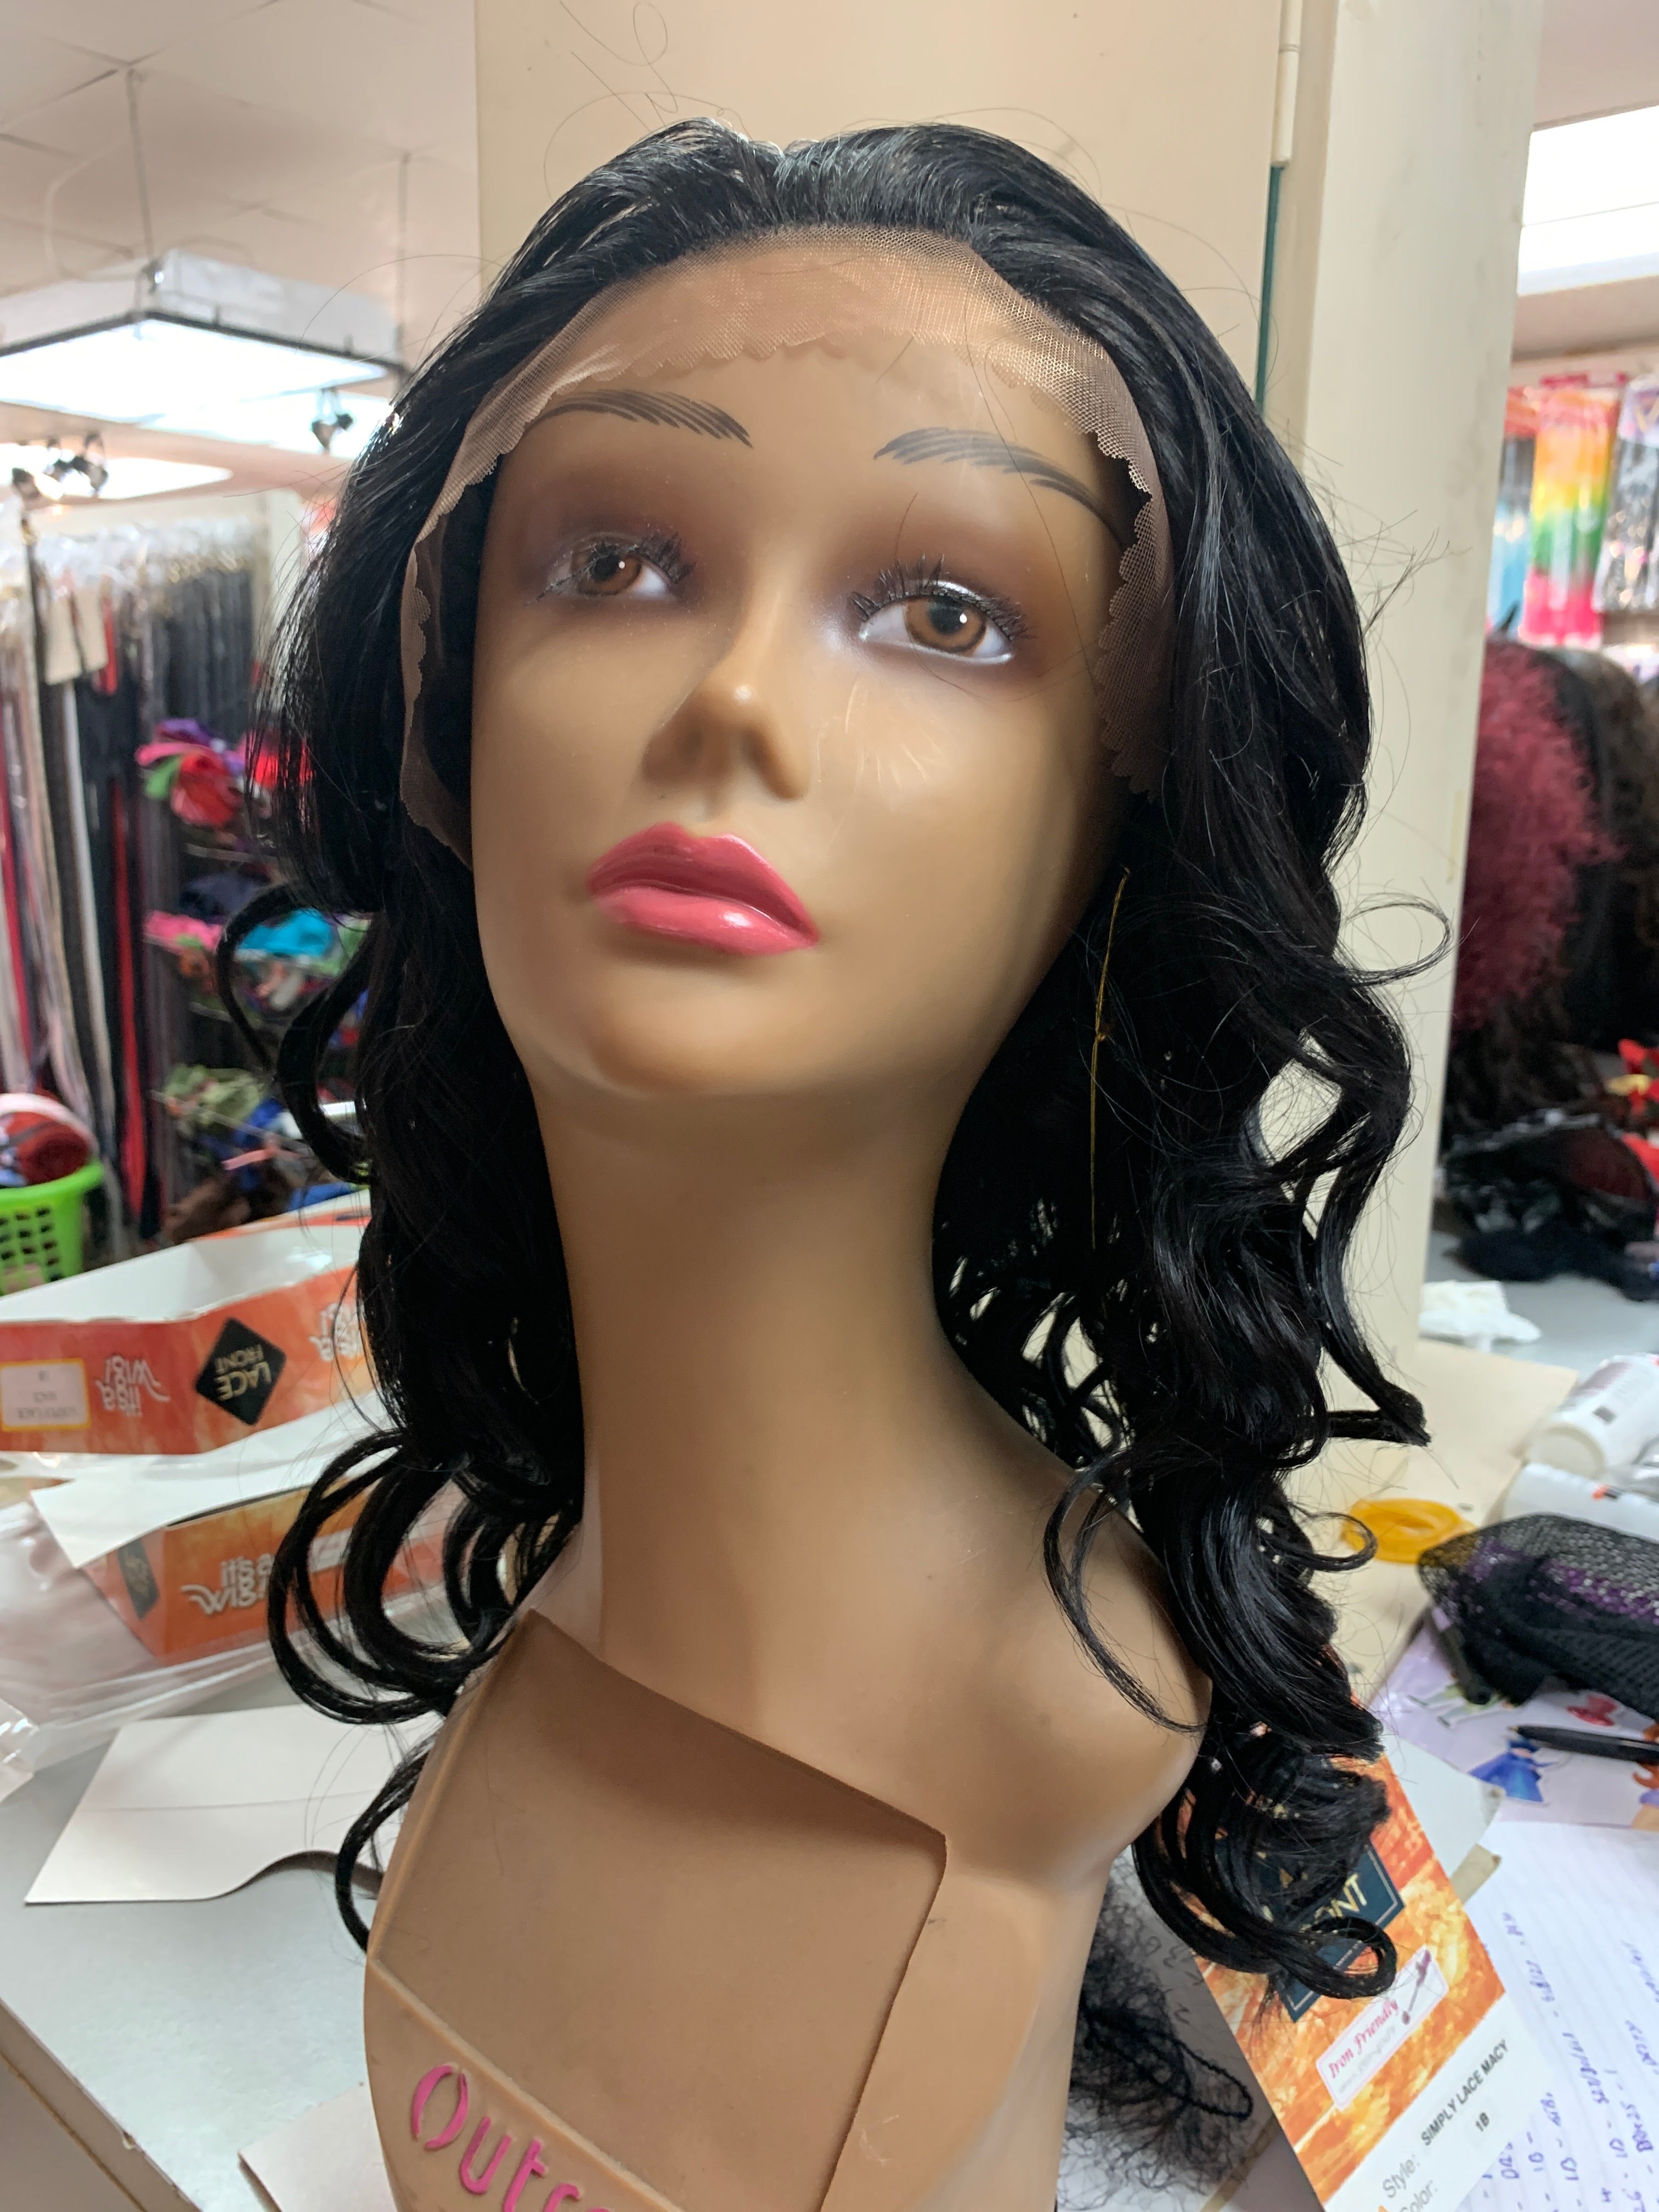 It’s a wig simply lace macy